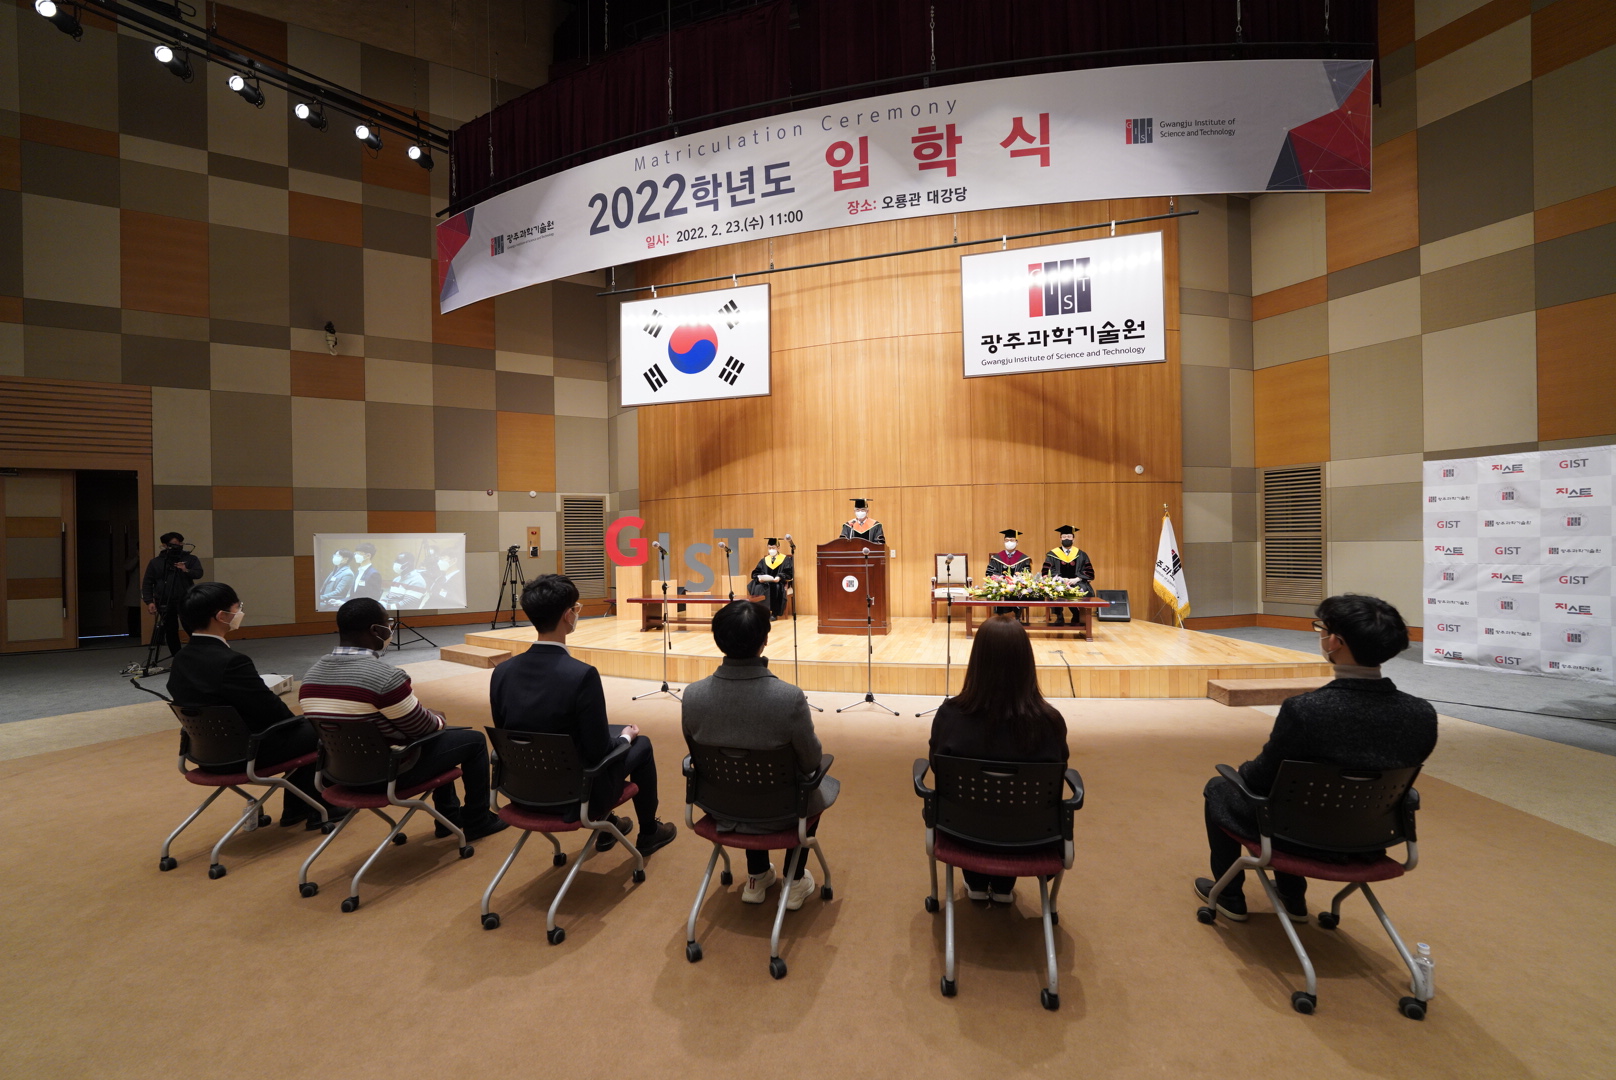 GIST hosts the matriculation ceremony for the 2022 academic year 이미지